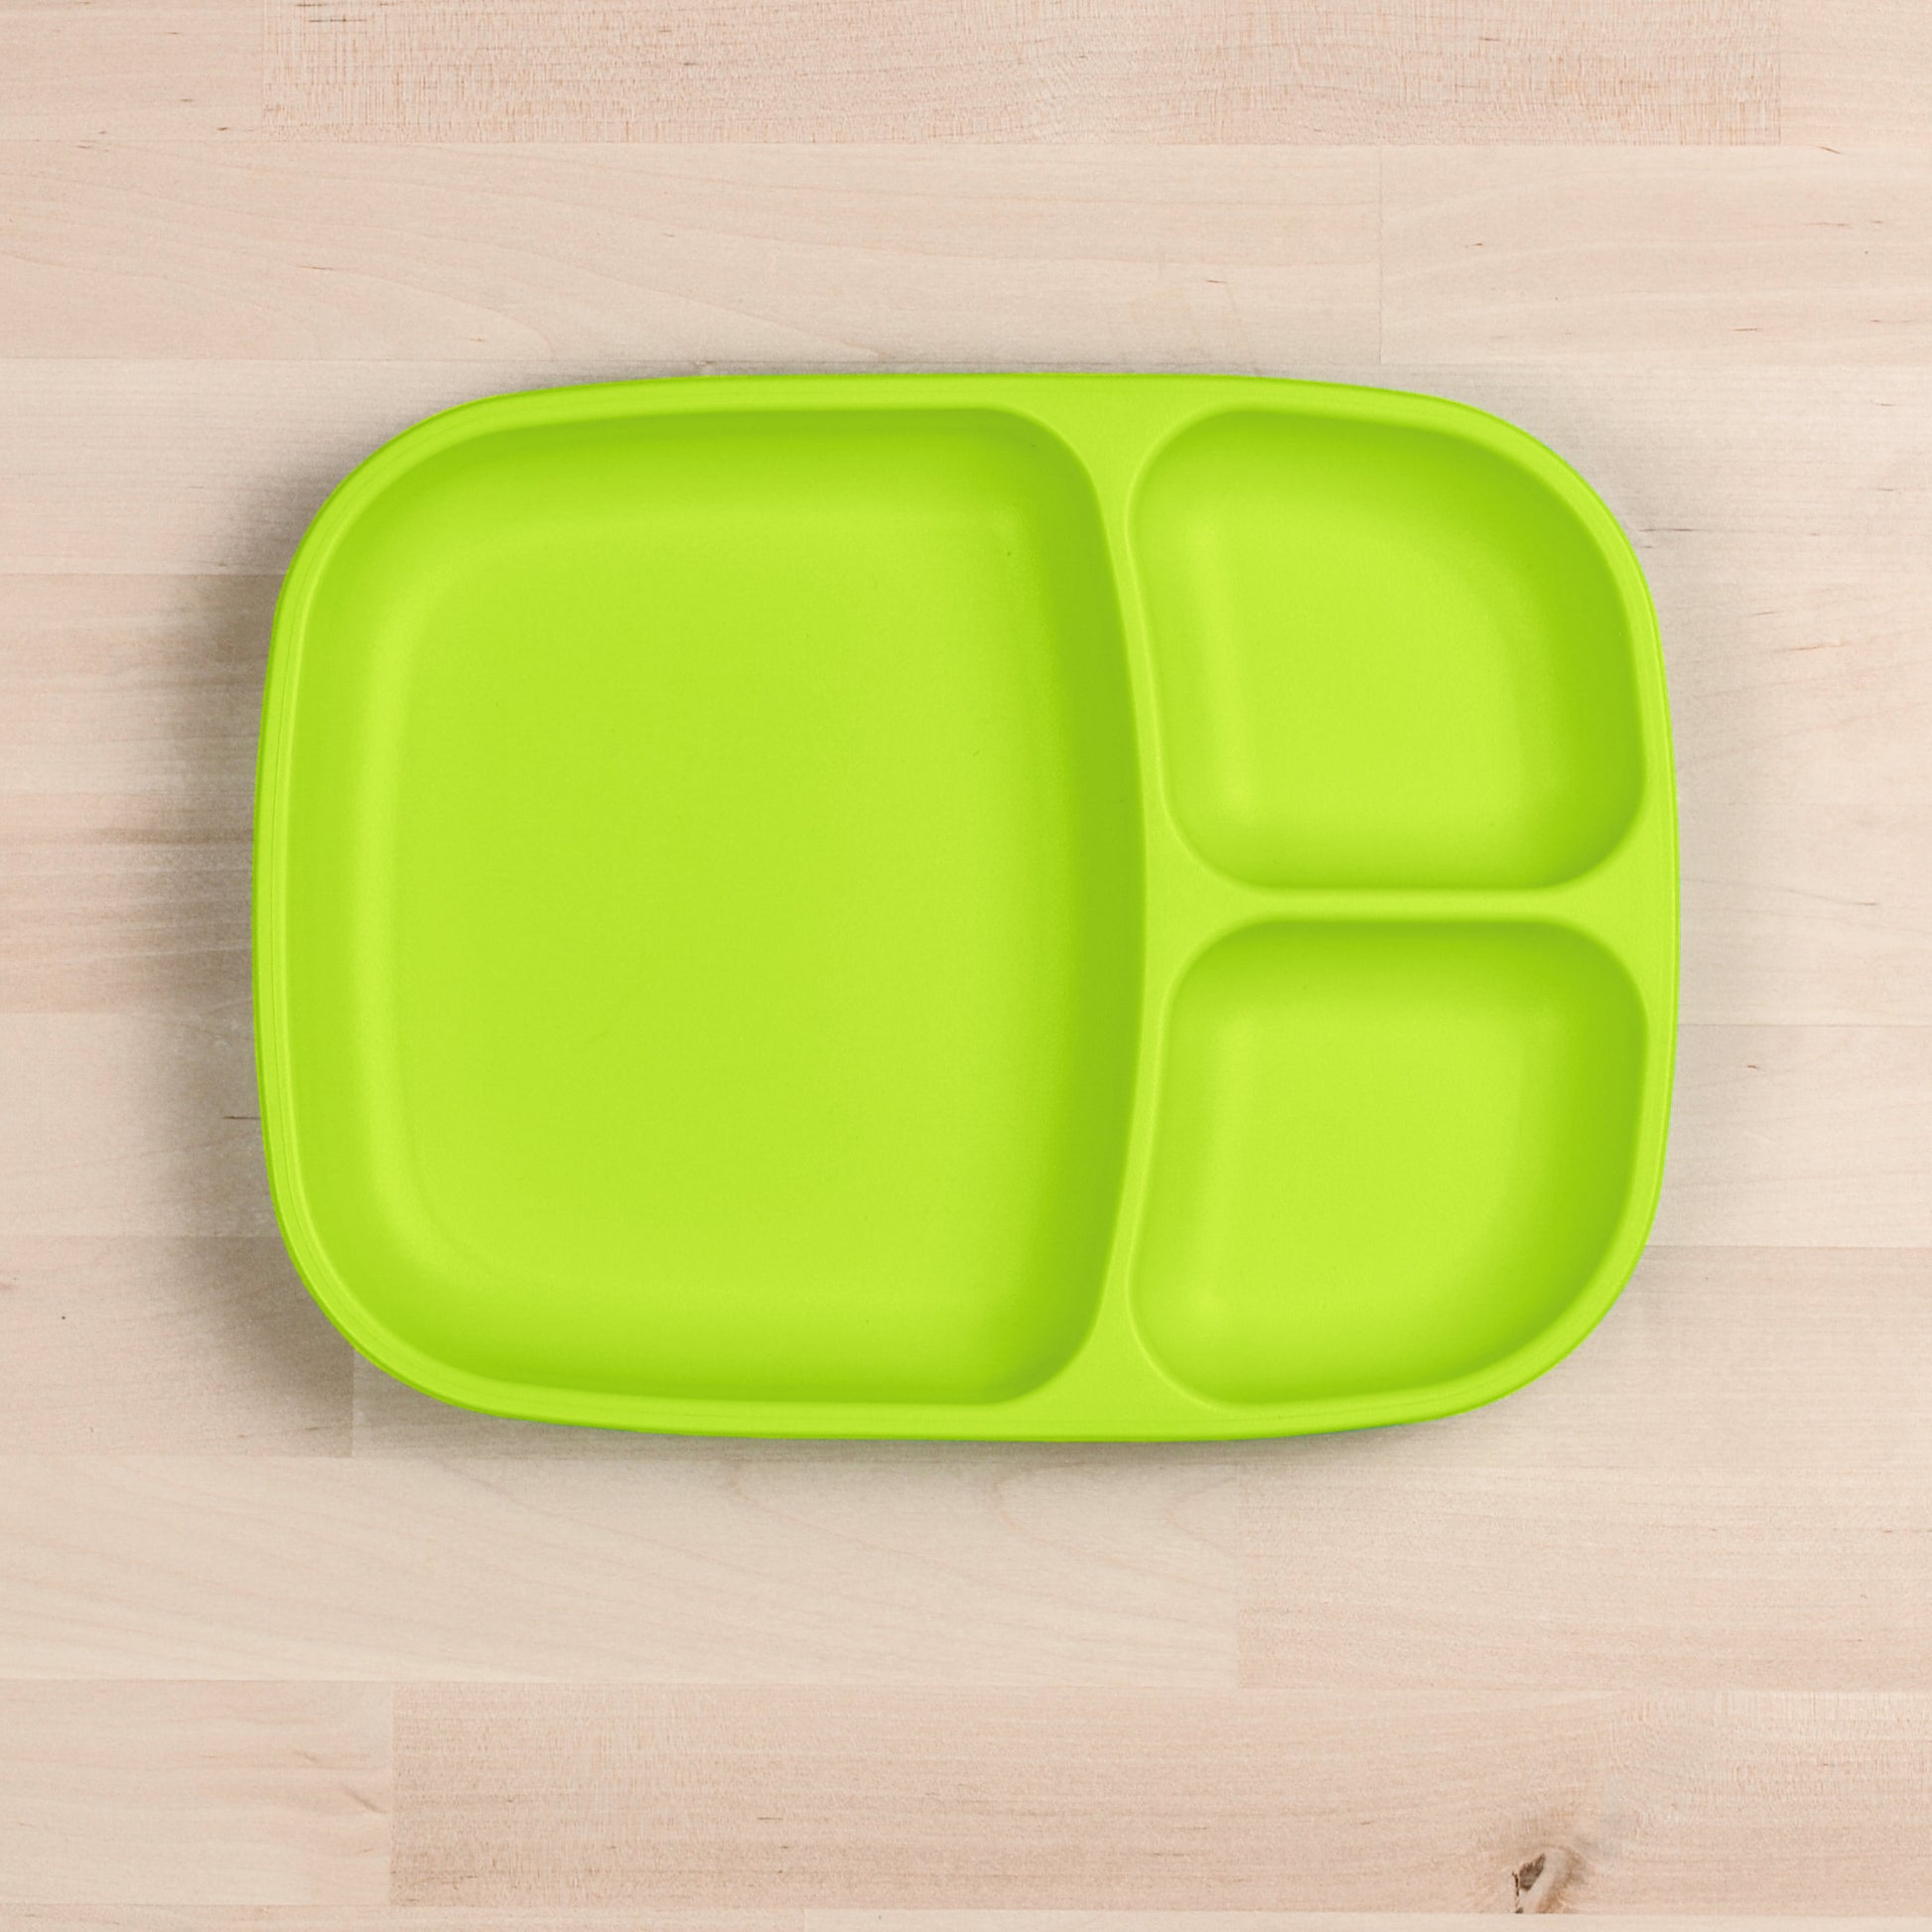 Re-Play Divided Tray in Lime Green from Bear & Moo